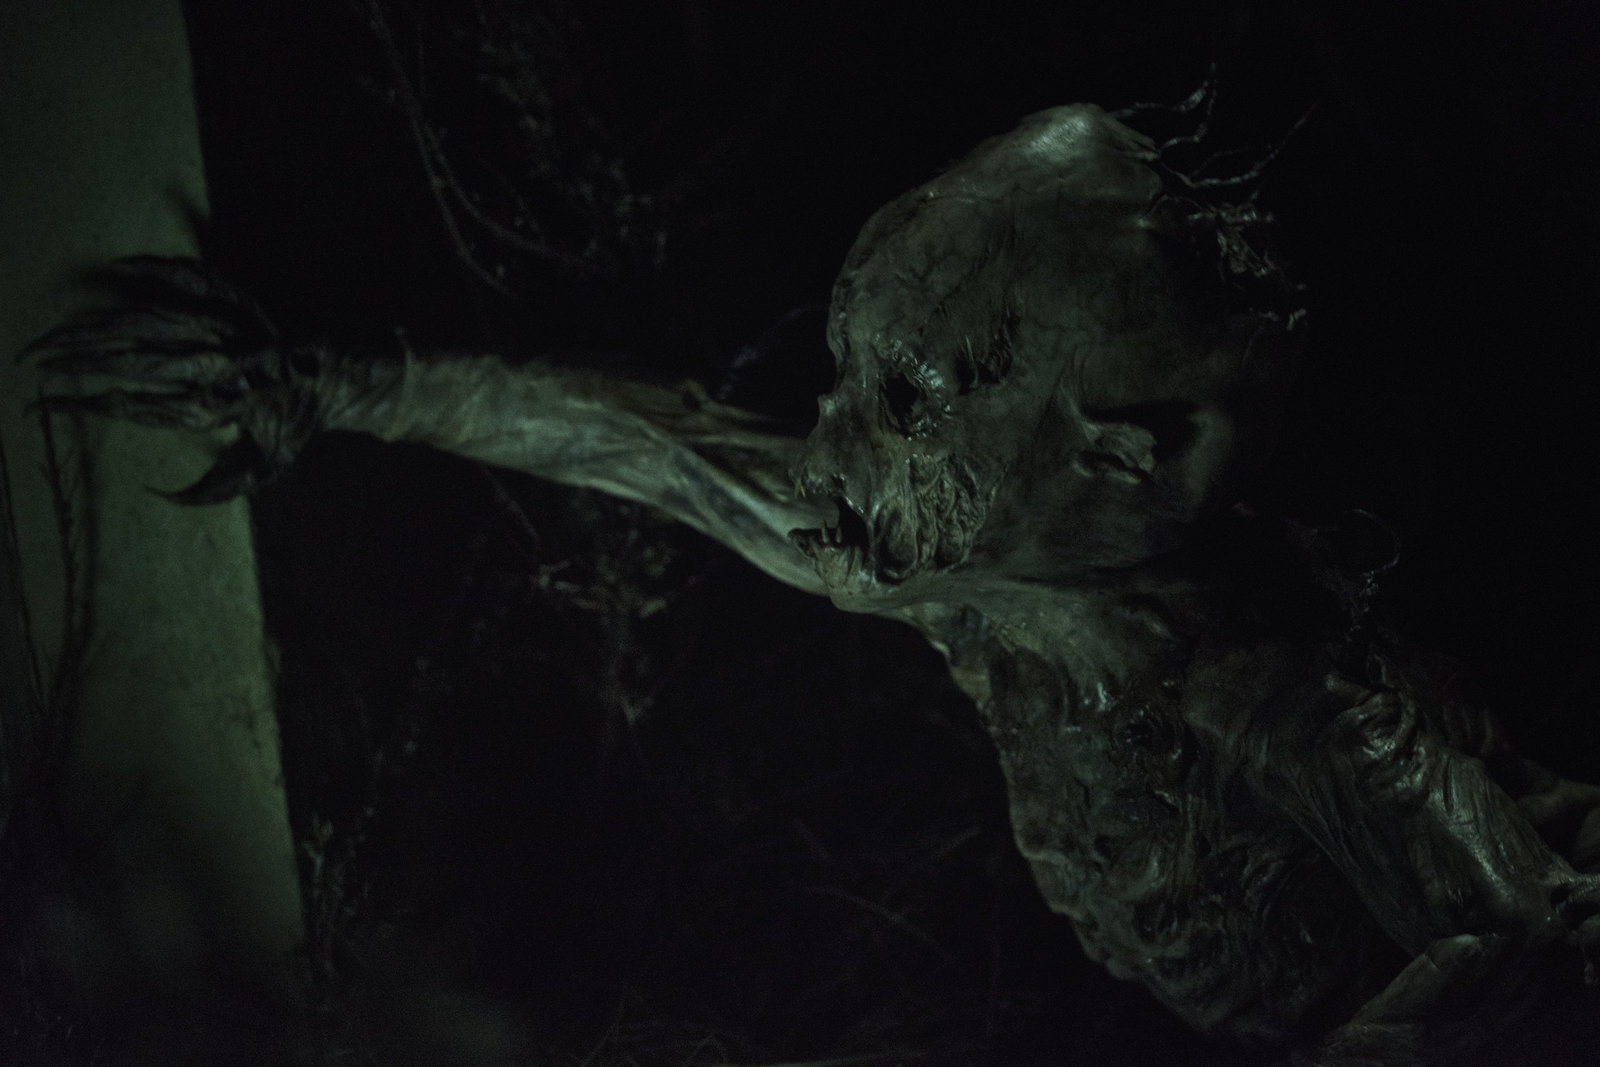 FROM THE DARKNESS\THE HALLOW [VIDEO REVIEW] - My, Movie review, Movies, Grade, Review, Filmmakers, Video, Fun